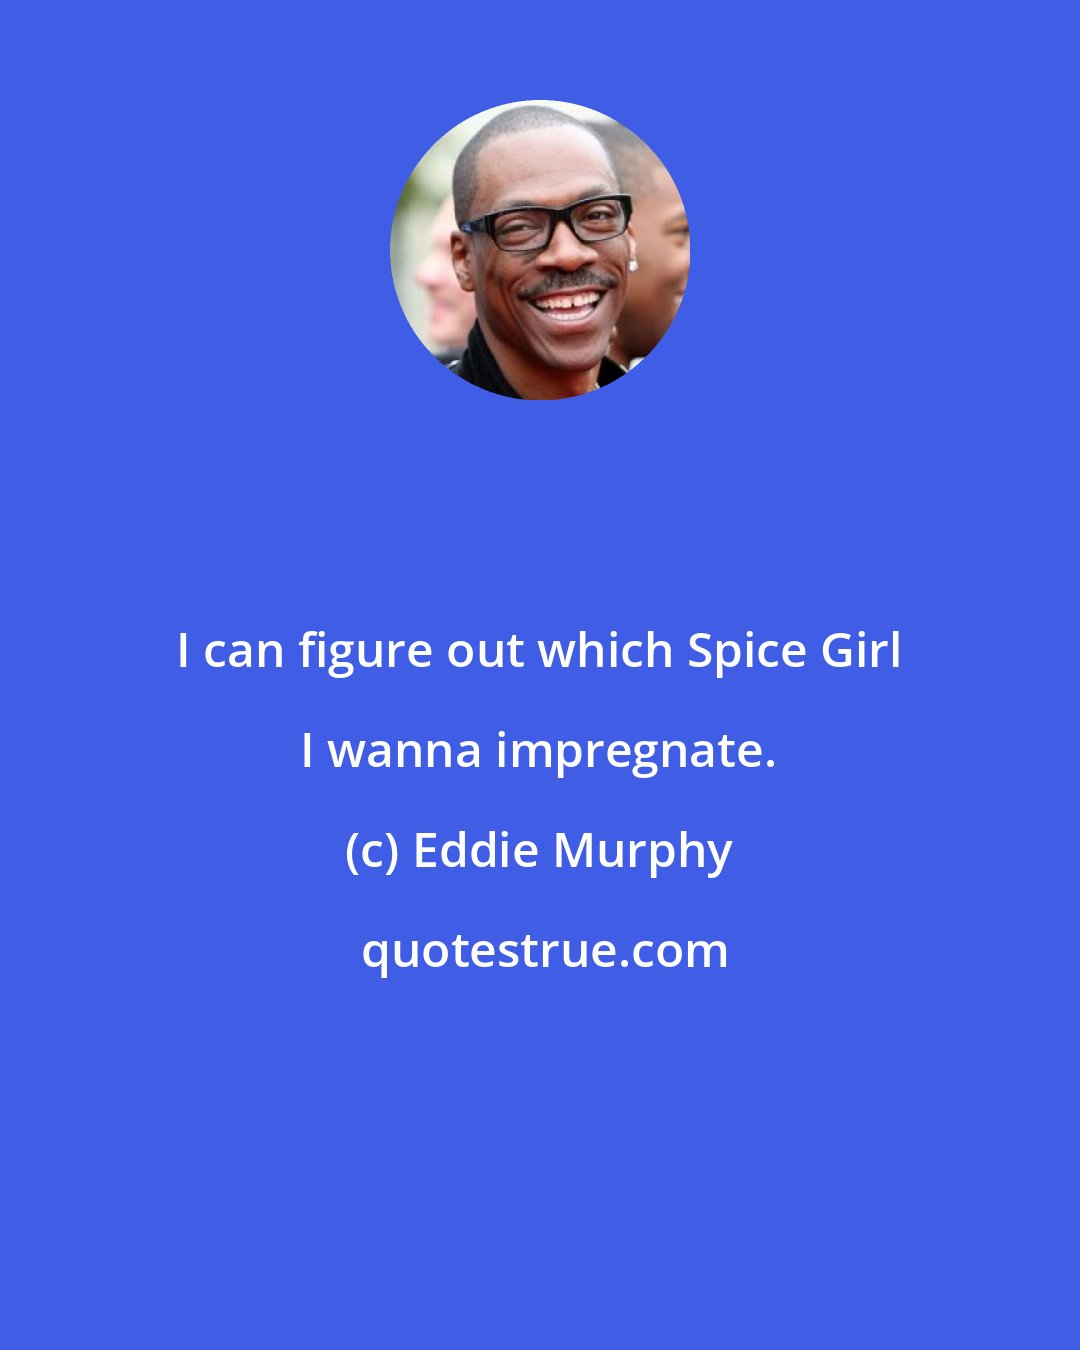 Eddie Murphy: I can figure out which Spice Girl I wanna impregnate.